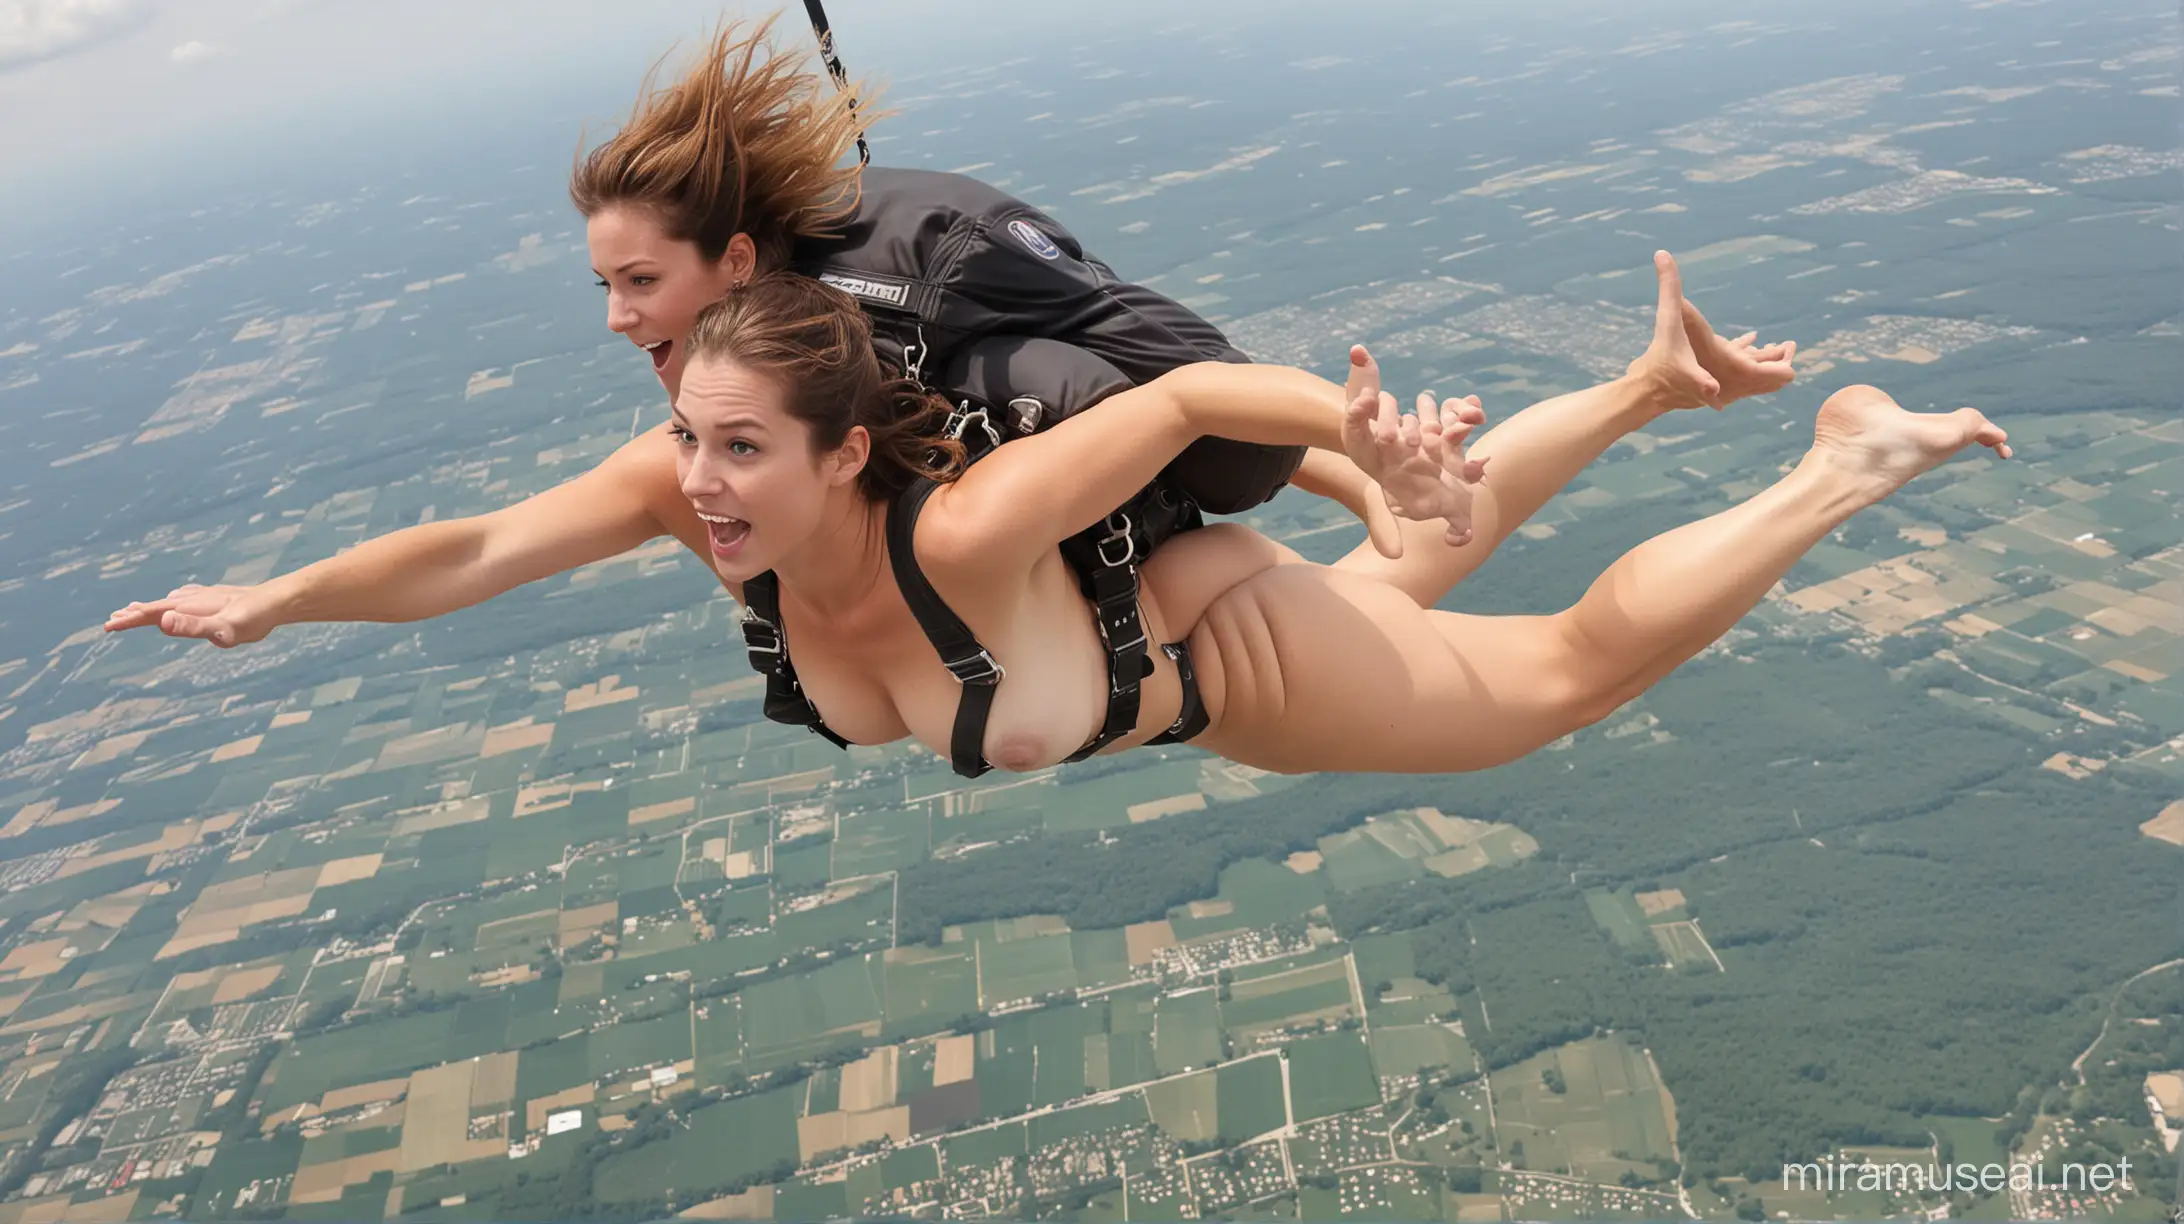 Thrilling Adventure Naked Woman Skydiving